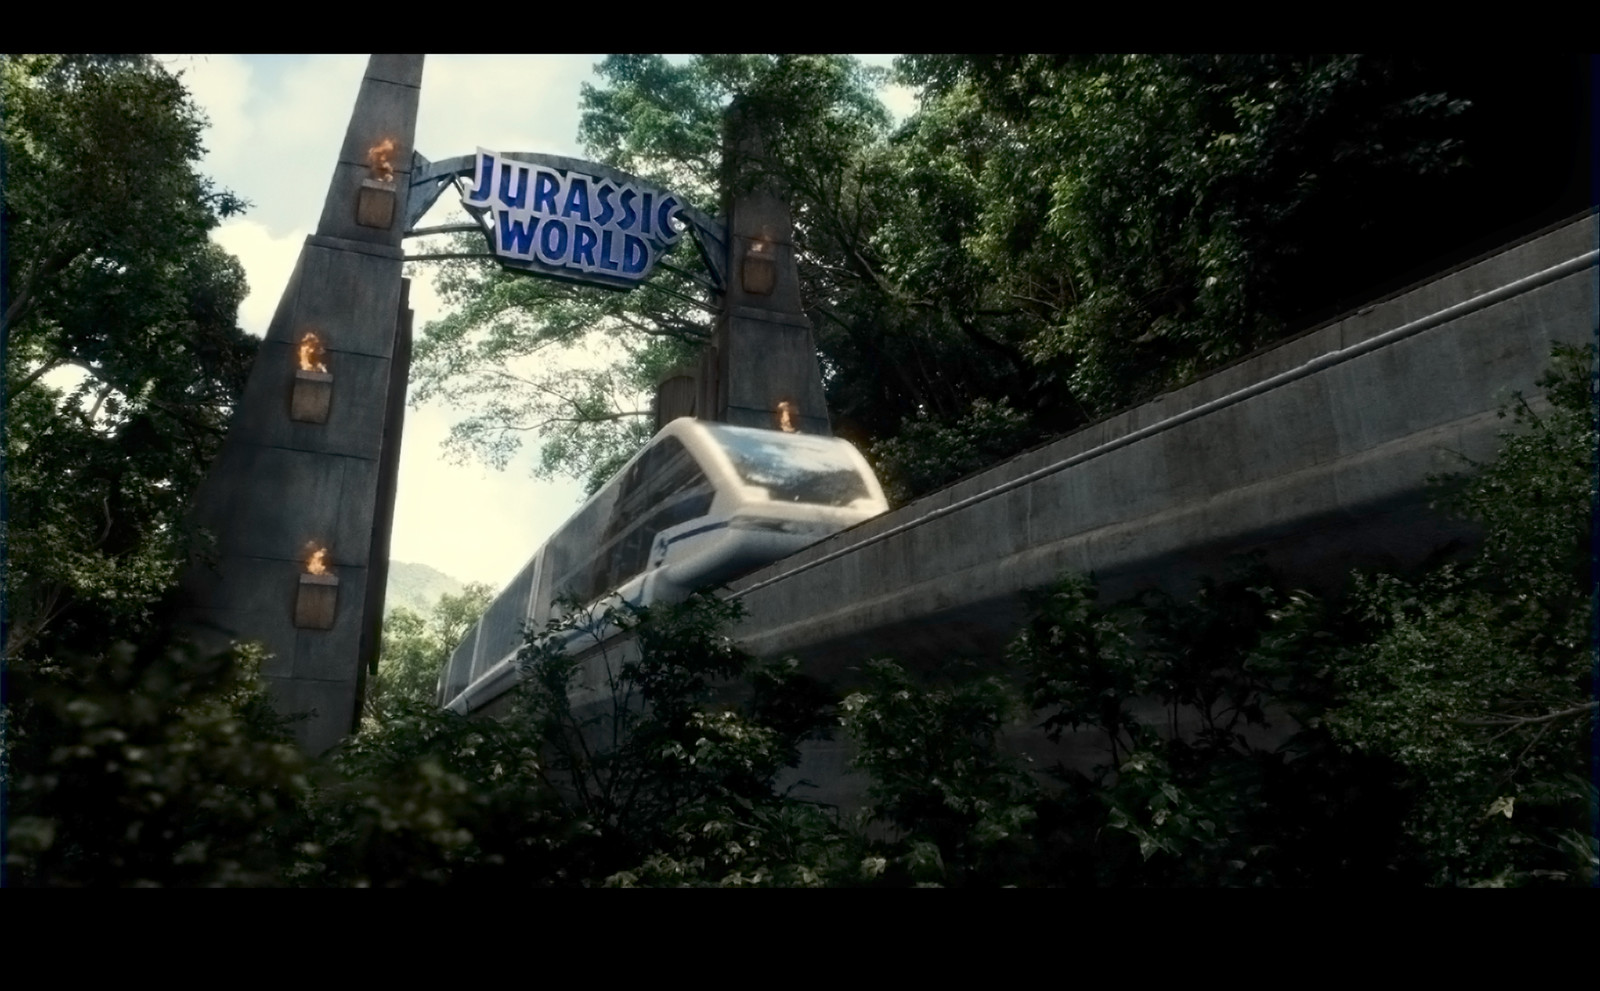 Jurassic World - 3D environment, monorail and plate augmentation